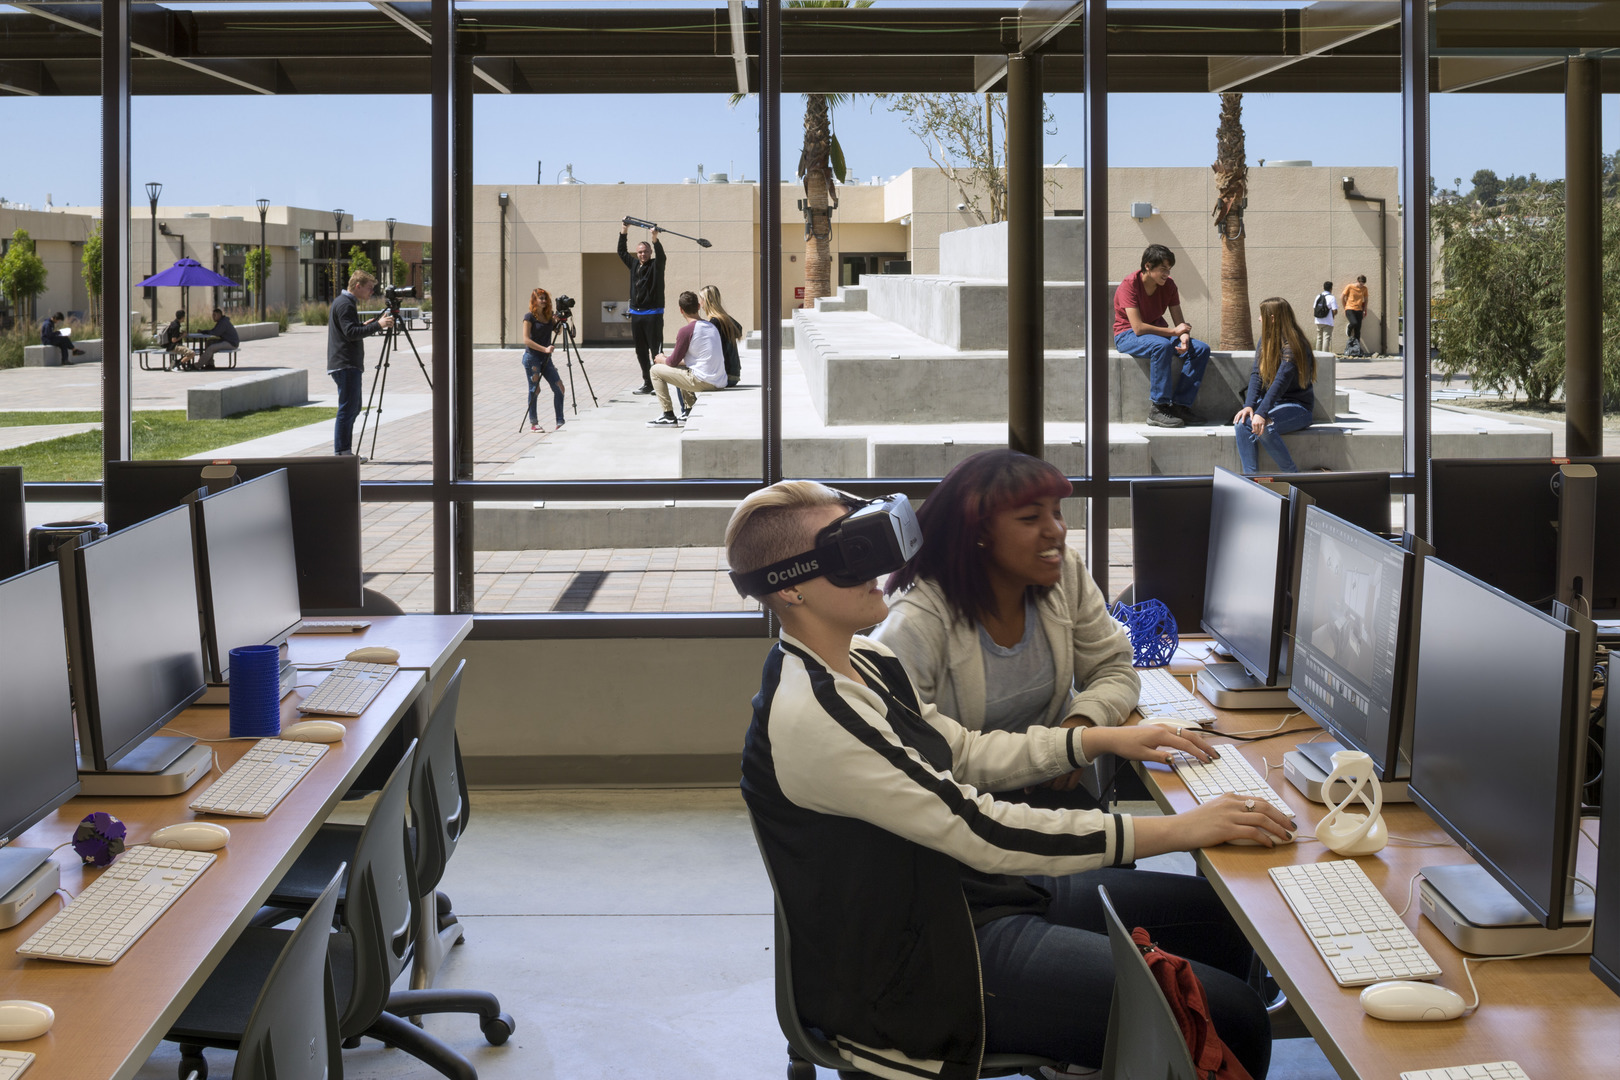 Smart building solutions help prepare students at Rancho Campana High School for success.